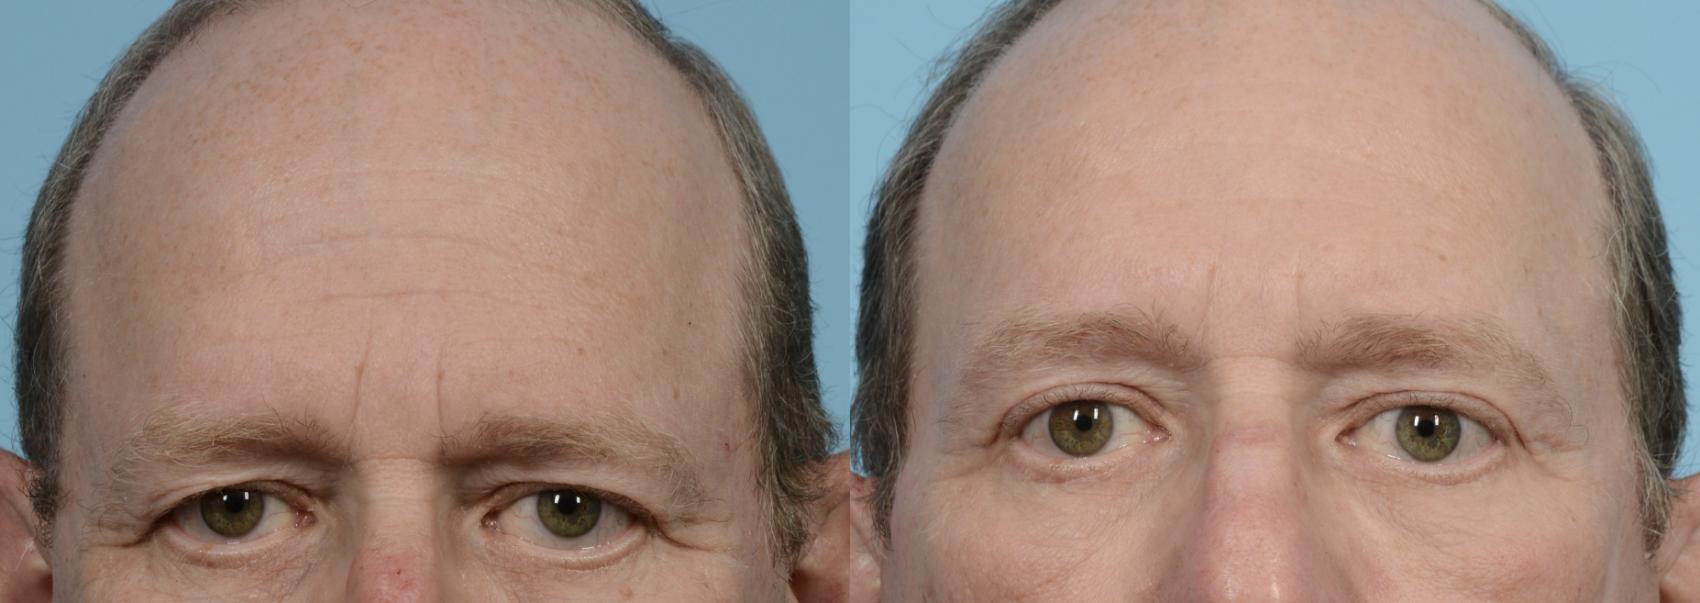 Before & After Brow Lift by Dr. Mustoe Case 950 Front View in Chicago, IL